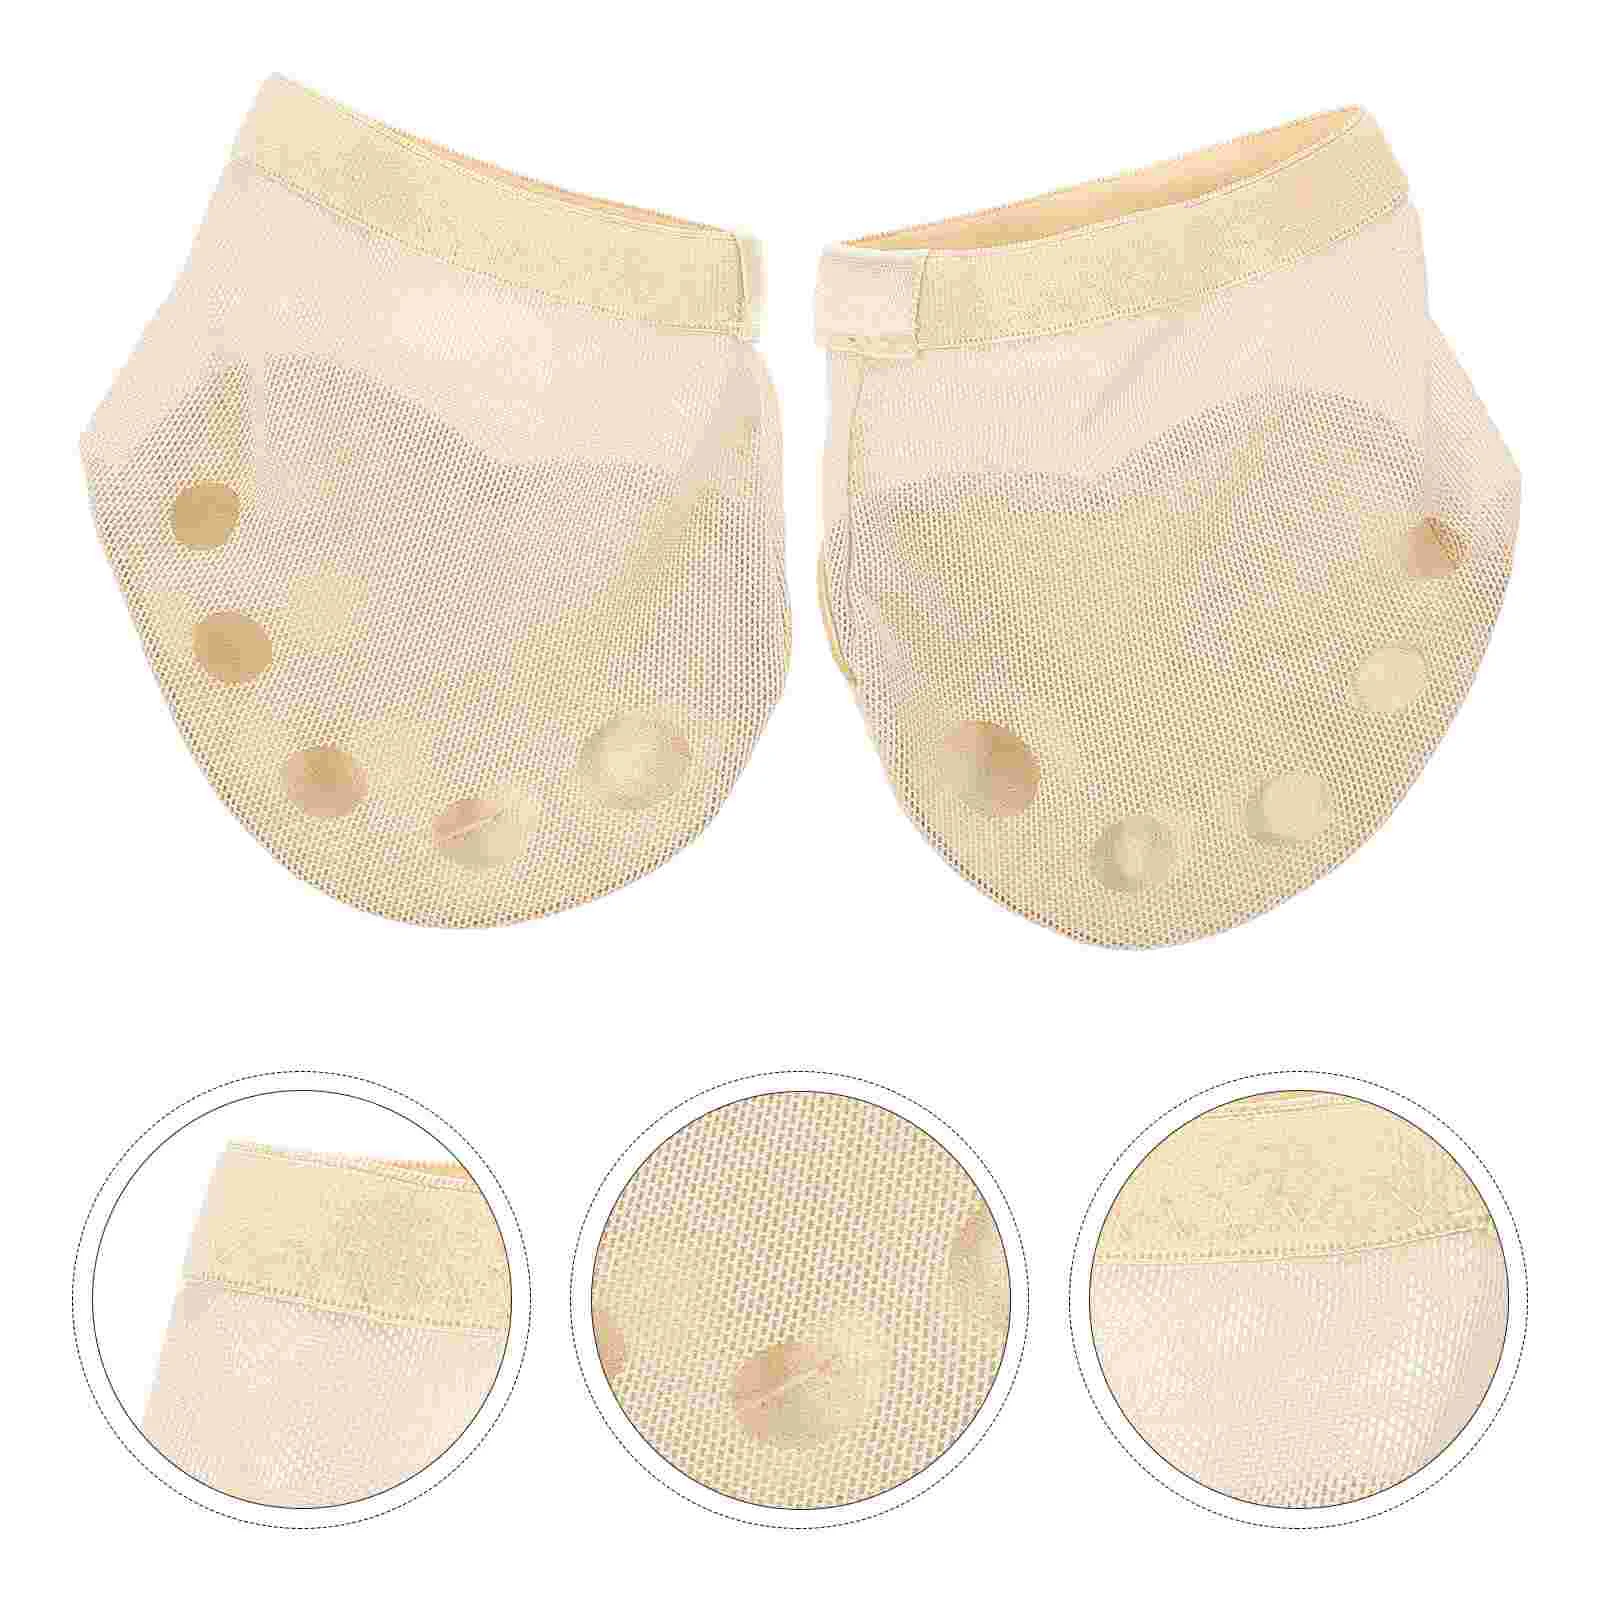 1 Pair Five Holes Half Socks Forefoot Cushion Protective Foot Paw Foot Care Supplies for Ballet Size S розетка yousmart white five holes socket